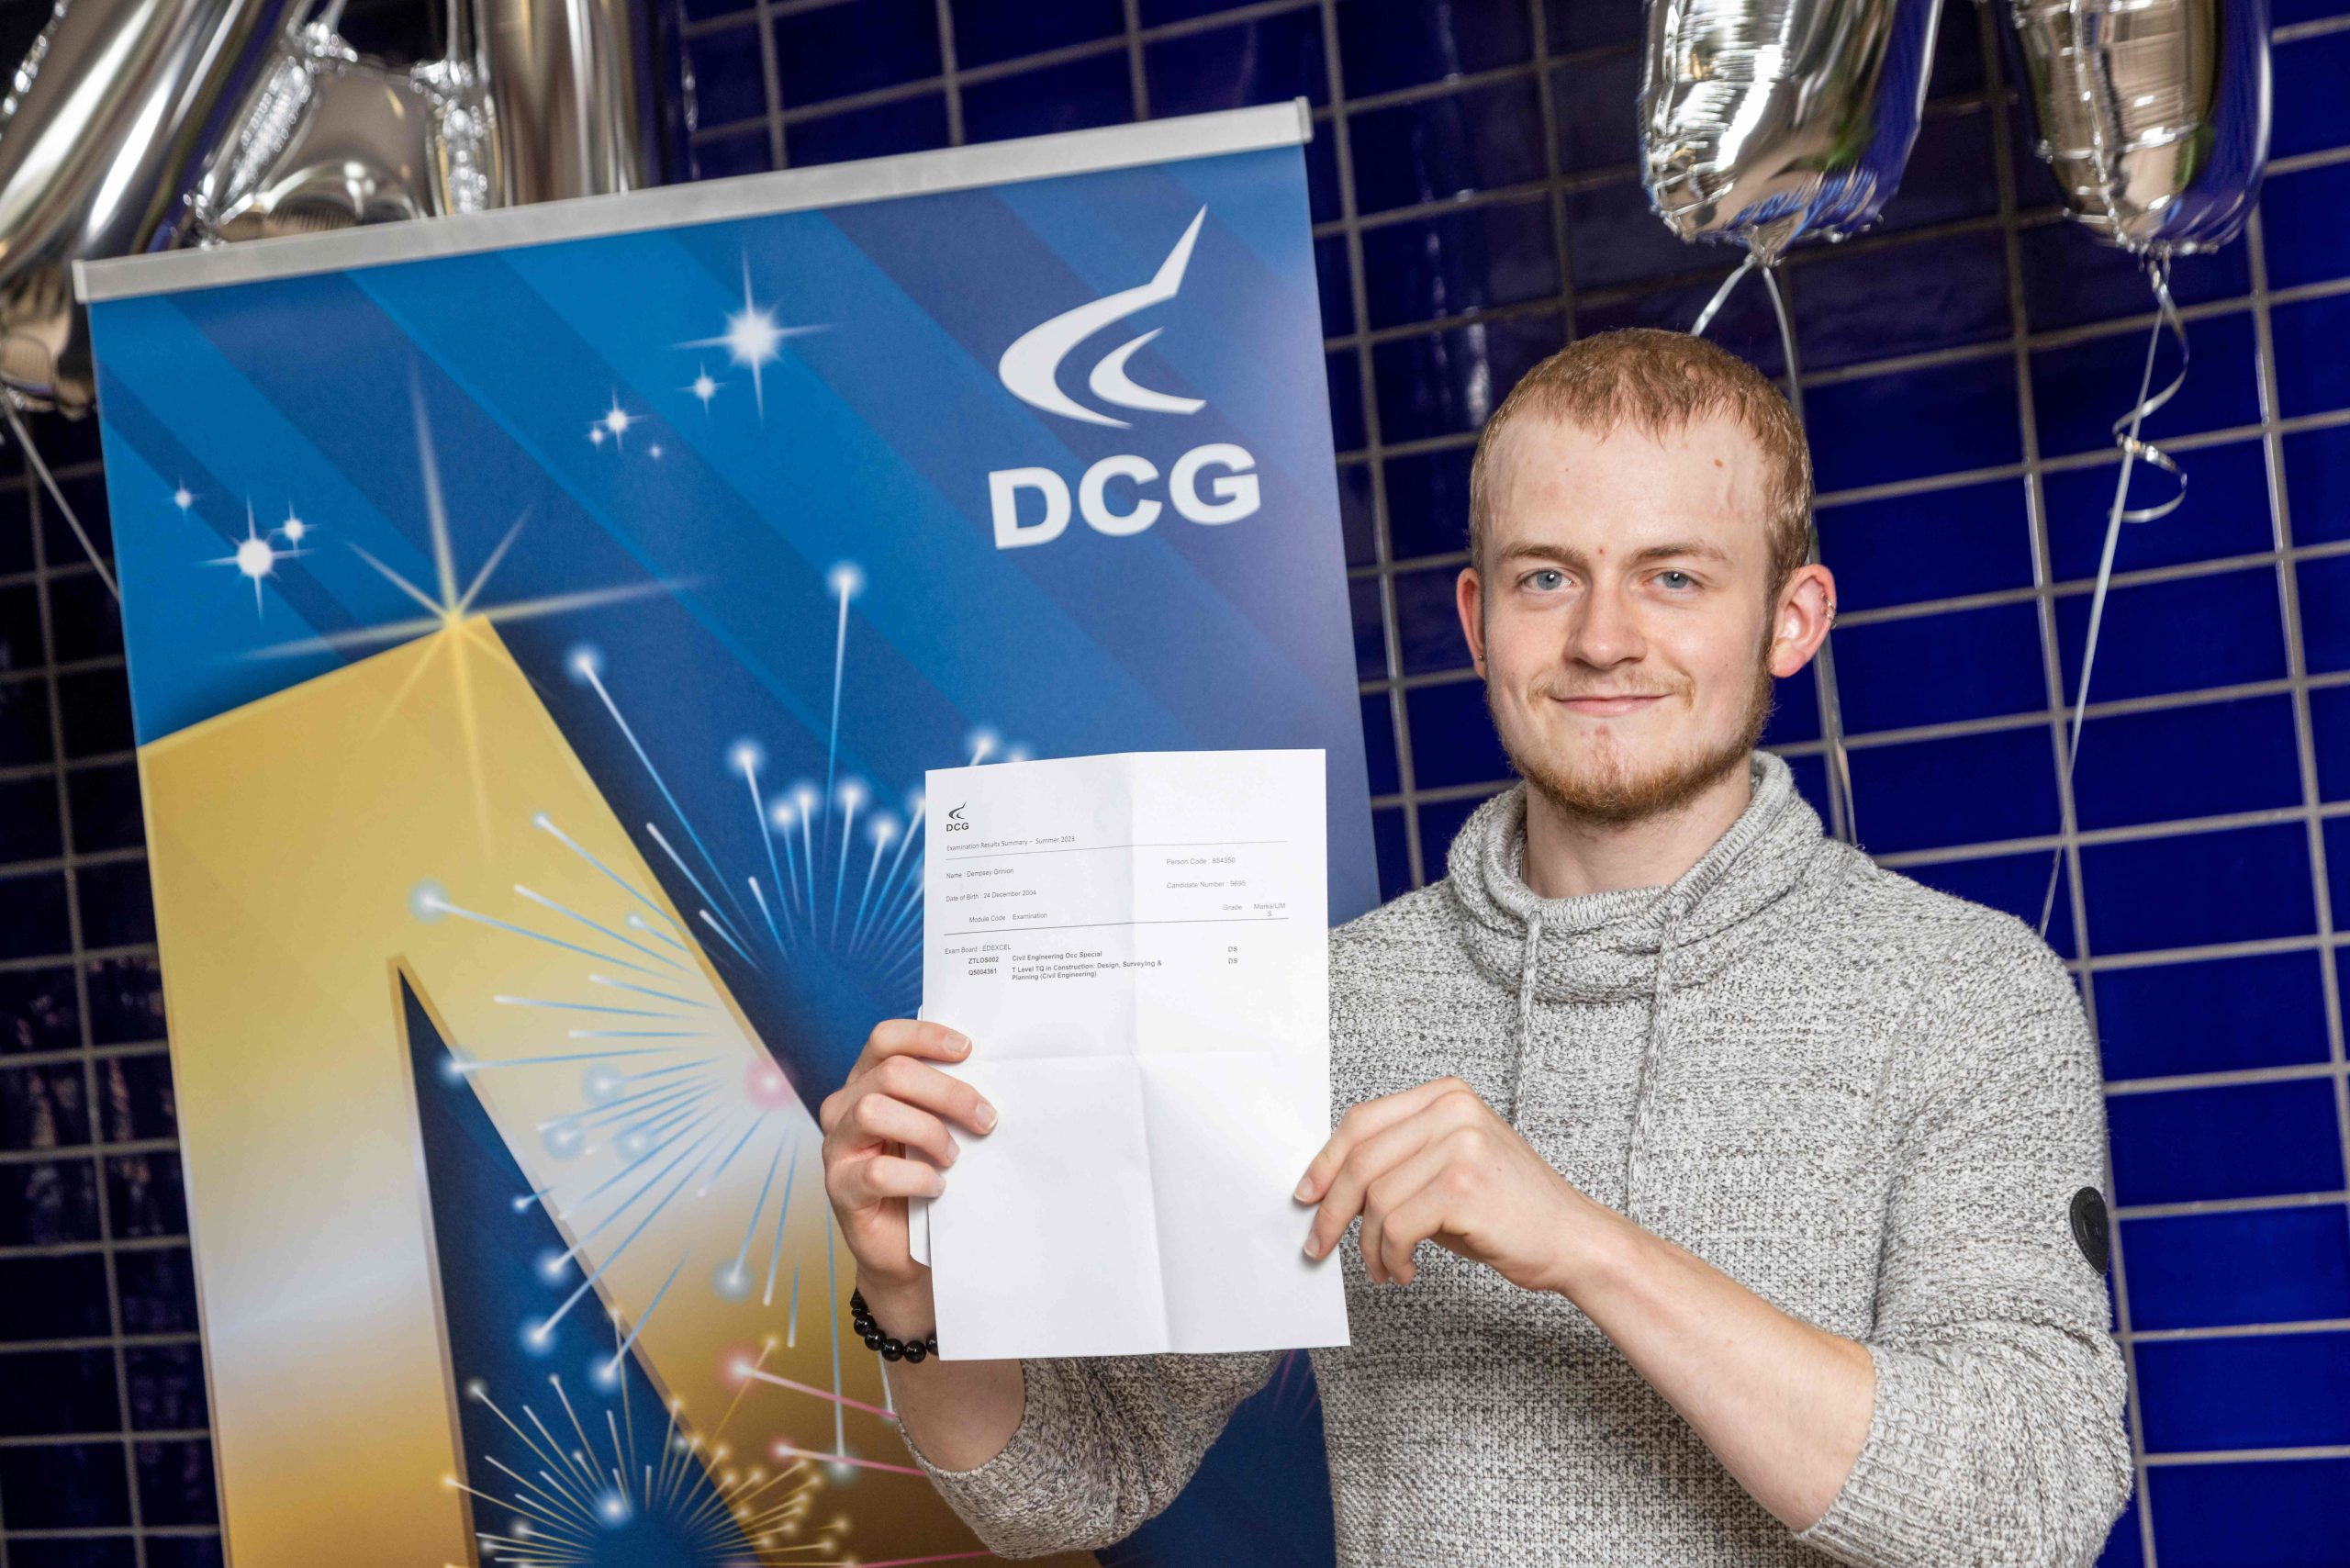 Young male with short blonde hair wearing a grey jumper holding a document with exam results.